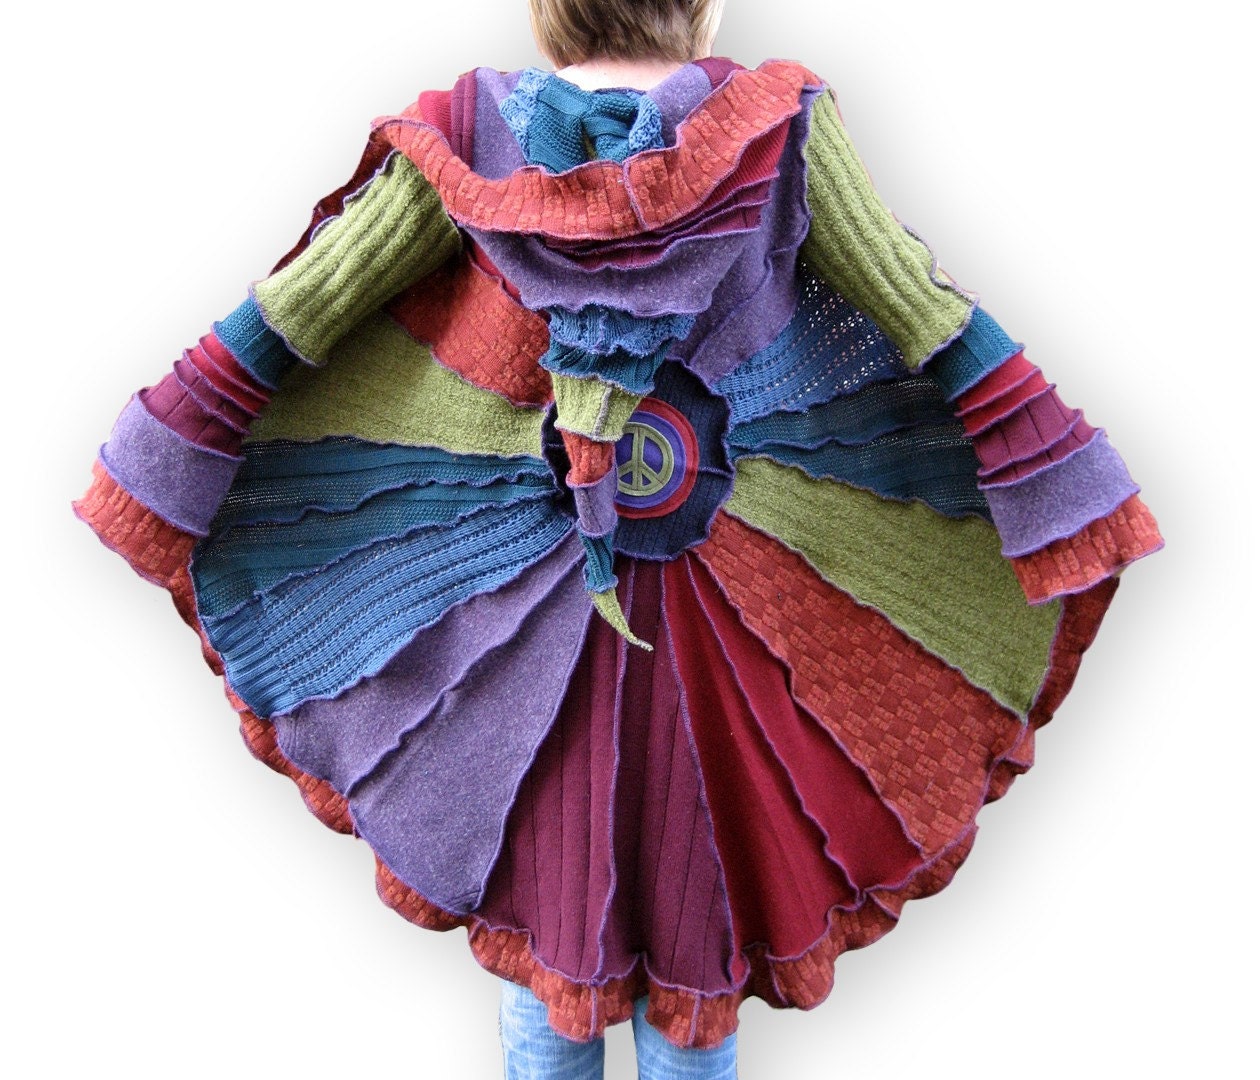 RESERVED FOR SANDYCOPE - Earthy Rainbow and Peace - S/M - Pinwheel Long Cardi Creation - Made from Recycled Sweaters